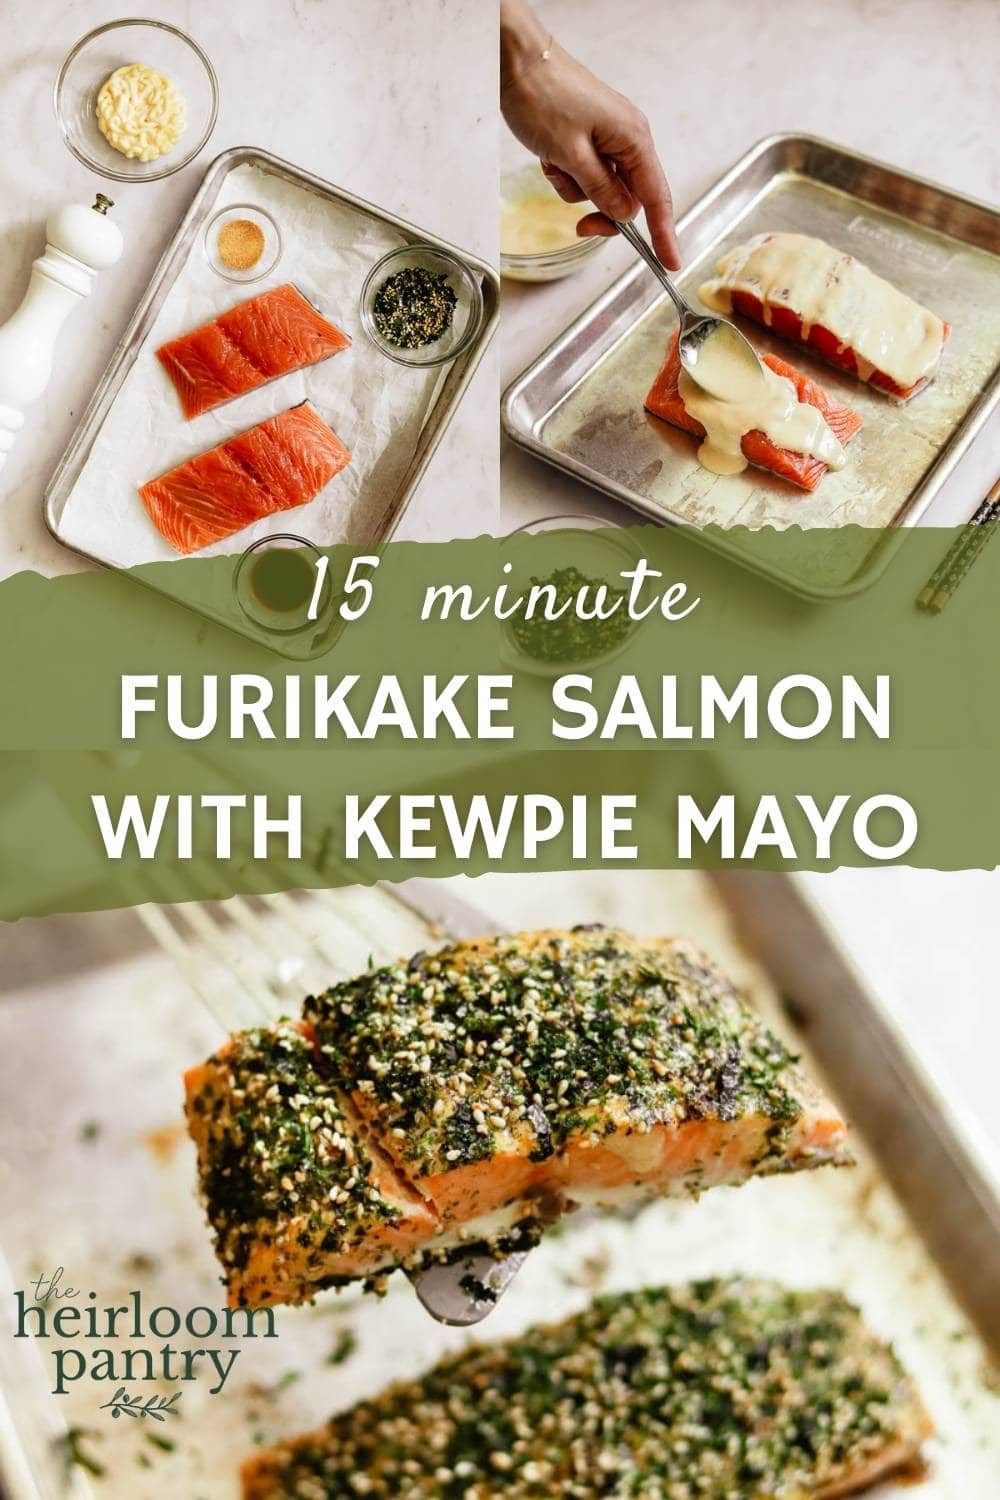 Furikake Salmon steps in 3 sections, including ingredients, spreading kewpie mayo shoyu on top of salmon, and finished baked salmon